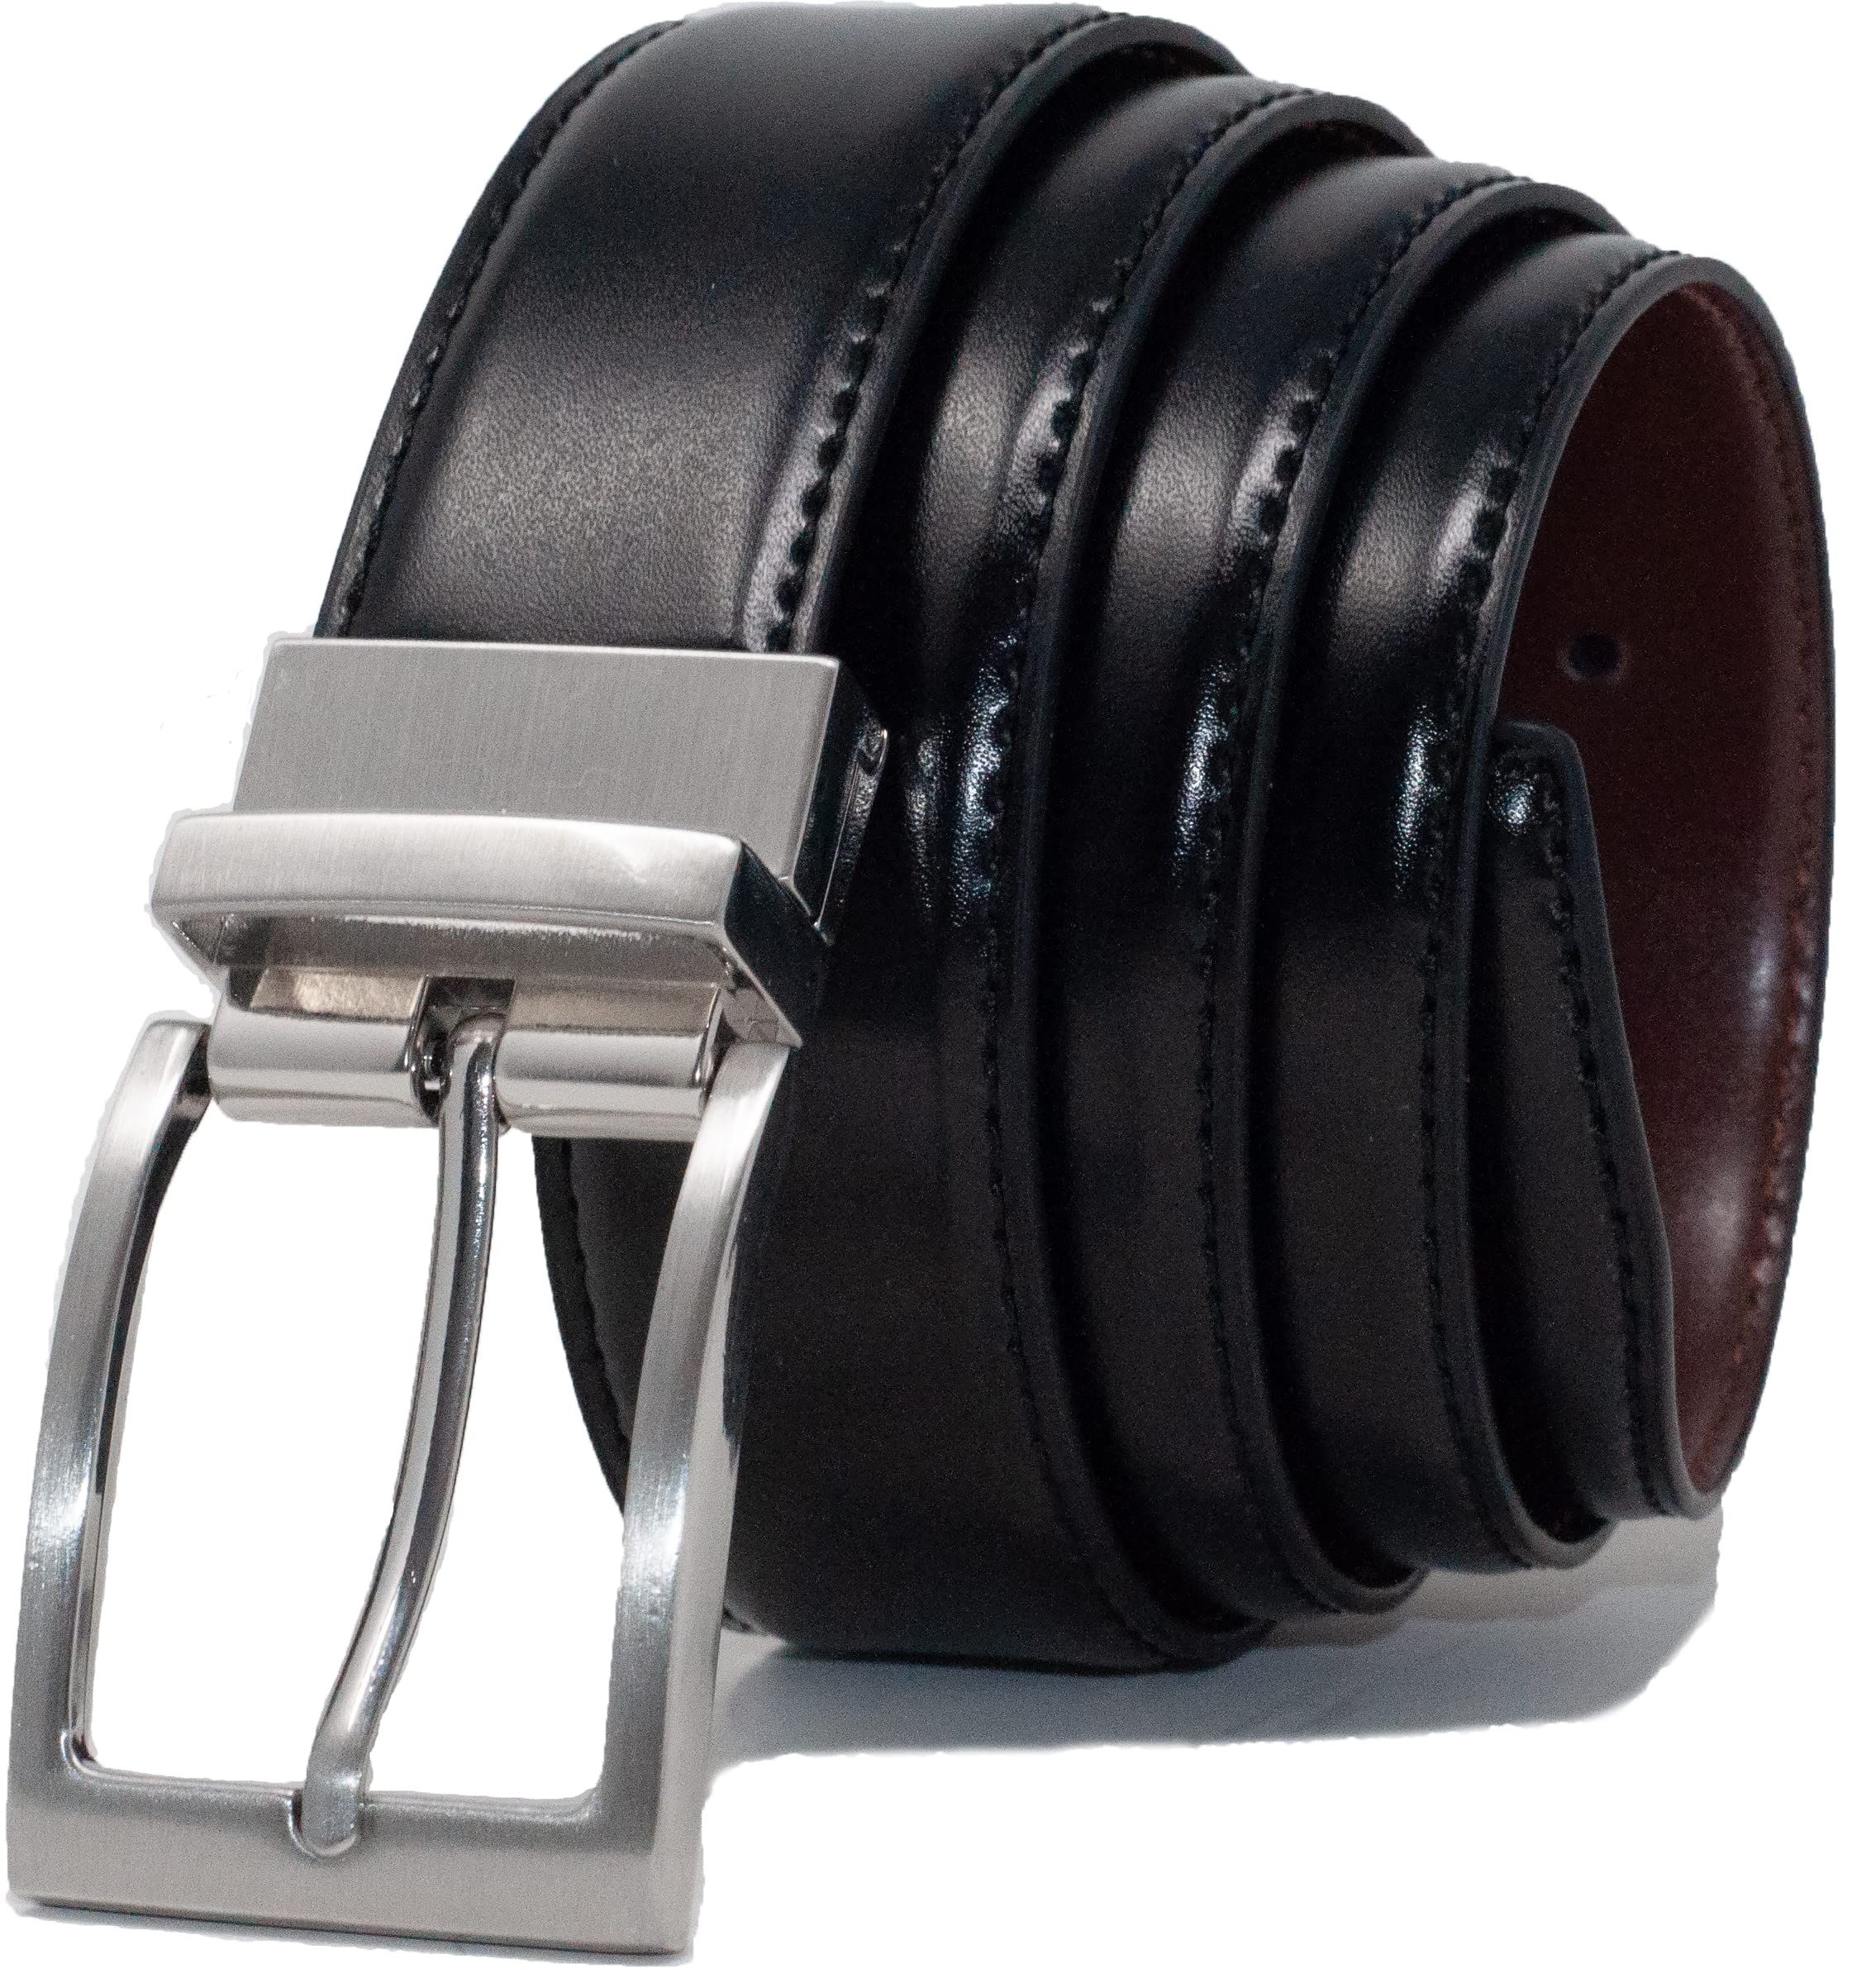 Mens Reversible Belts: Stay Versatile with Chic and Functional Mens Reversible Belts